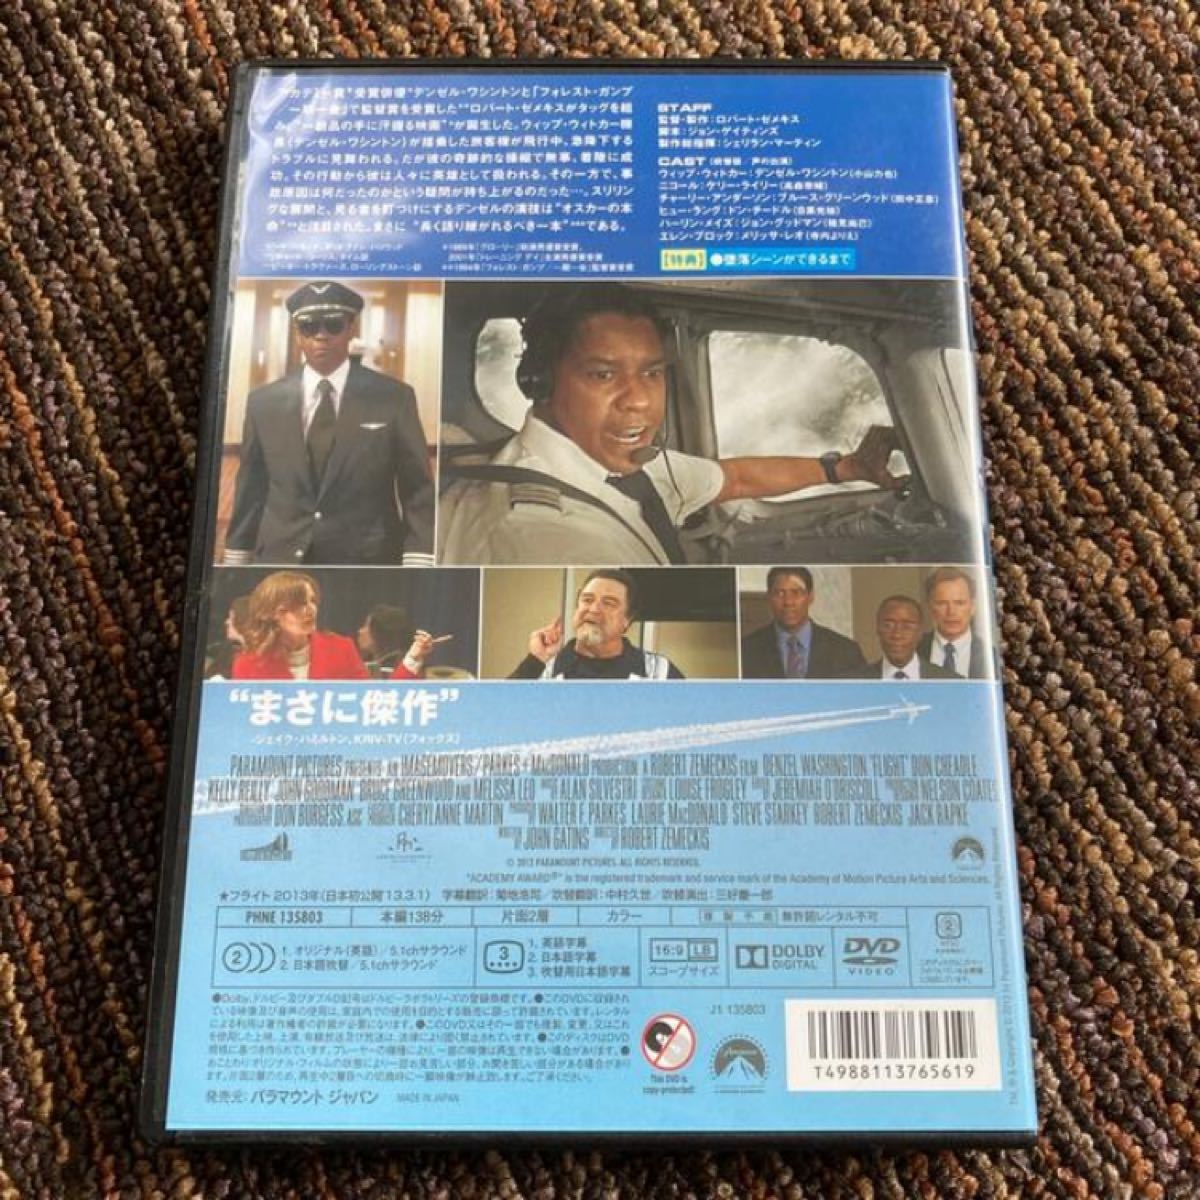 DVD フライト